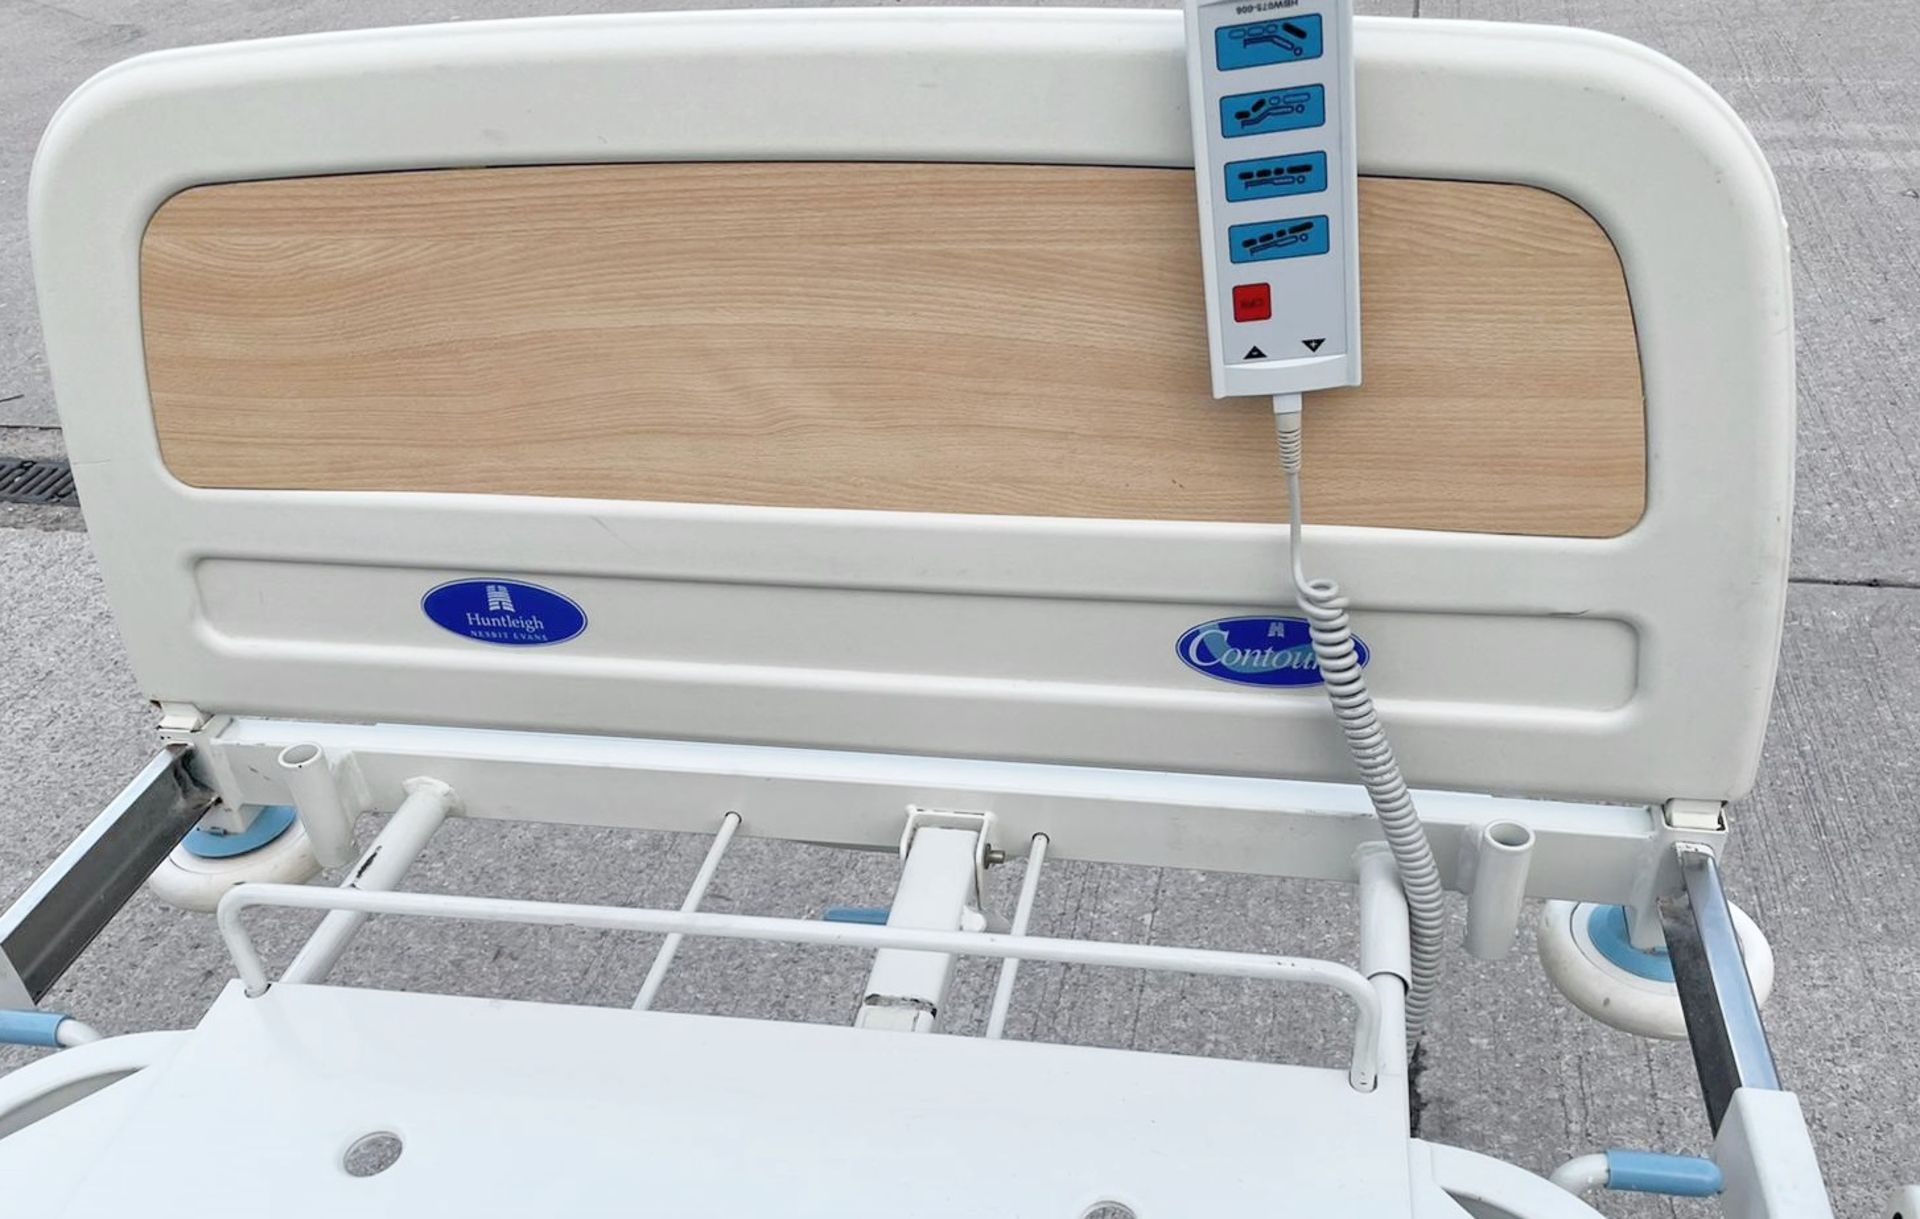 1 x Huntleigh CONTOURA Electric Hospital Bed - Features Rise/Fall 3-Way Profiling, Side Rails, - Image 2 of 5